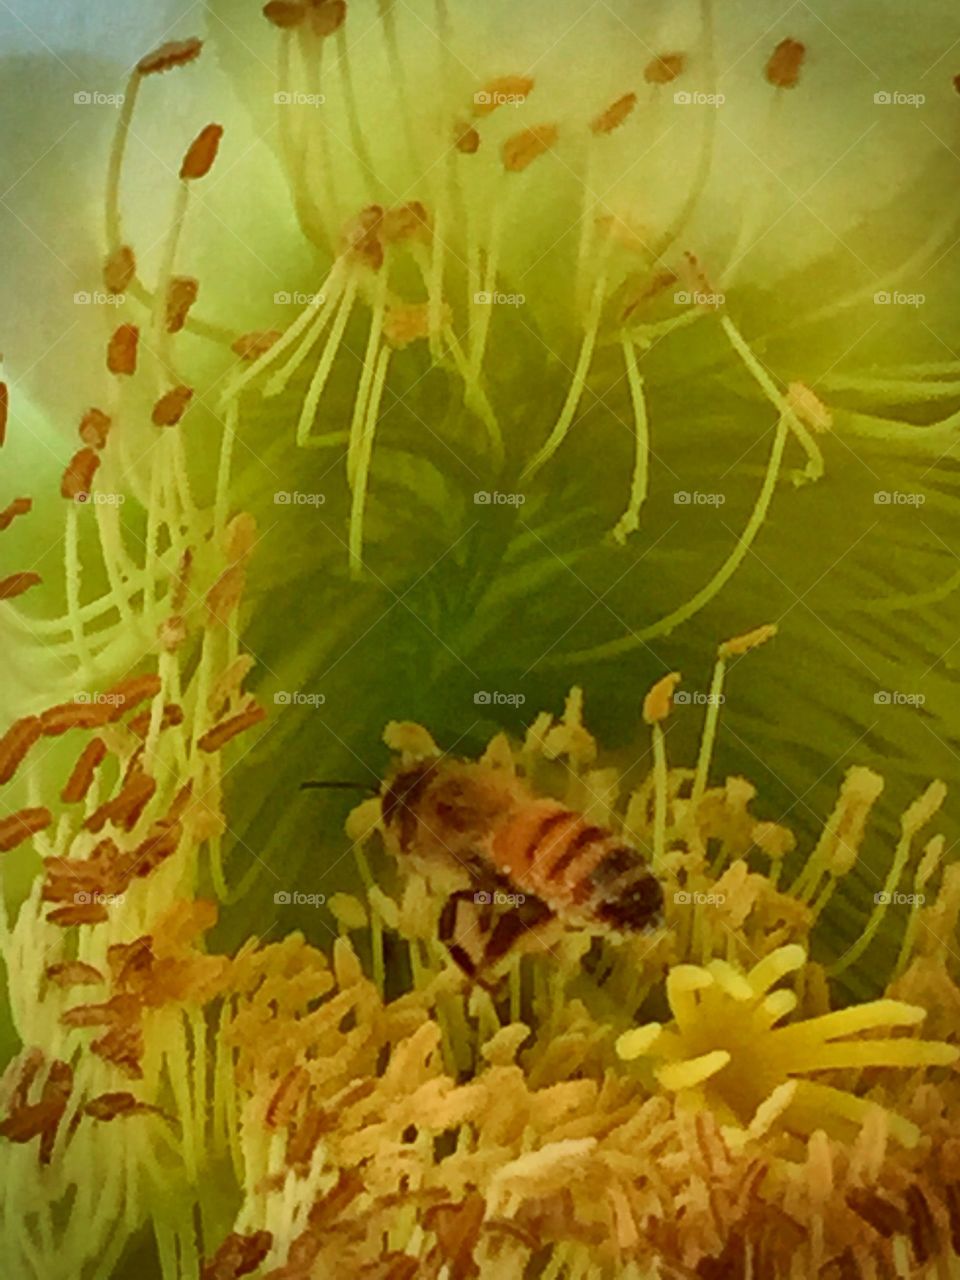 HONEY BEE COLLECTING NECTAR FROM A CACTUS FLOWER